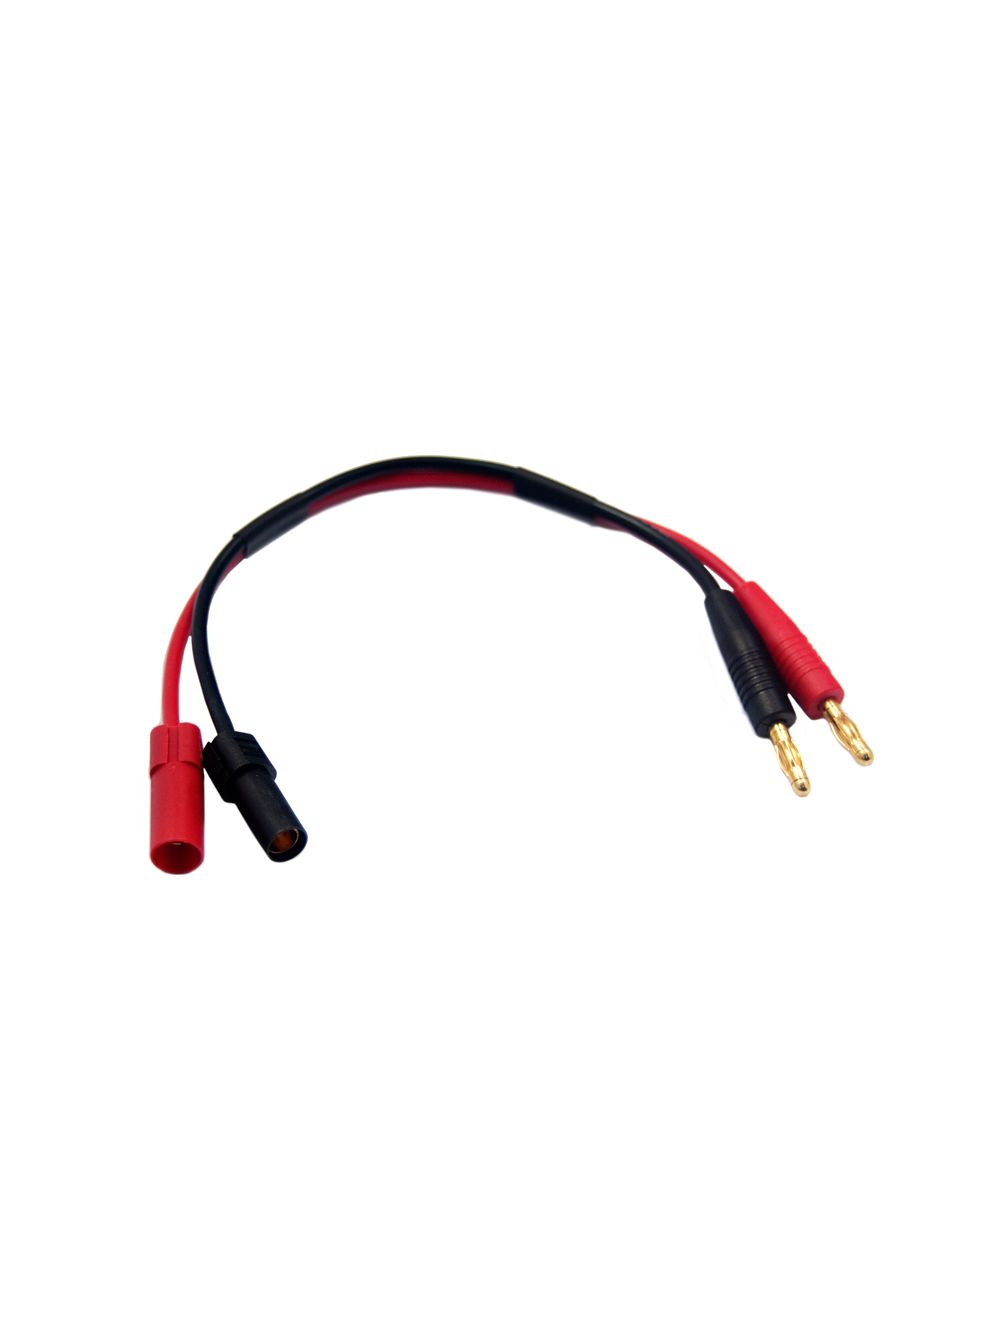 Overlander XT150 to 4mm Gold Connectors Charge Lead  2802